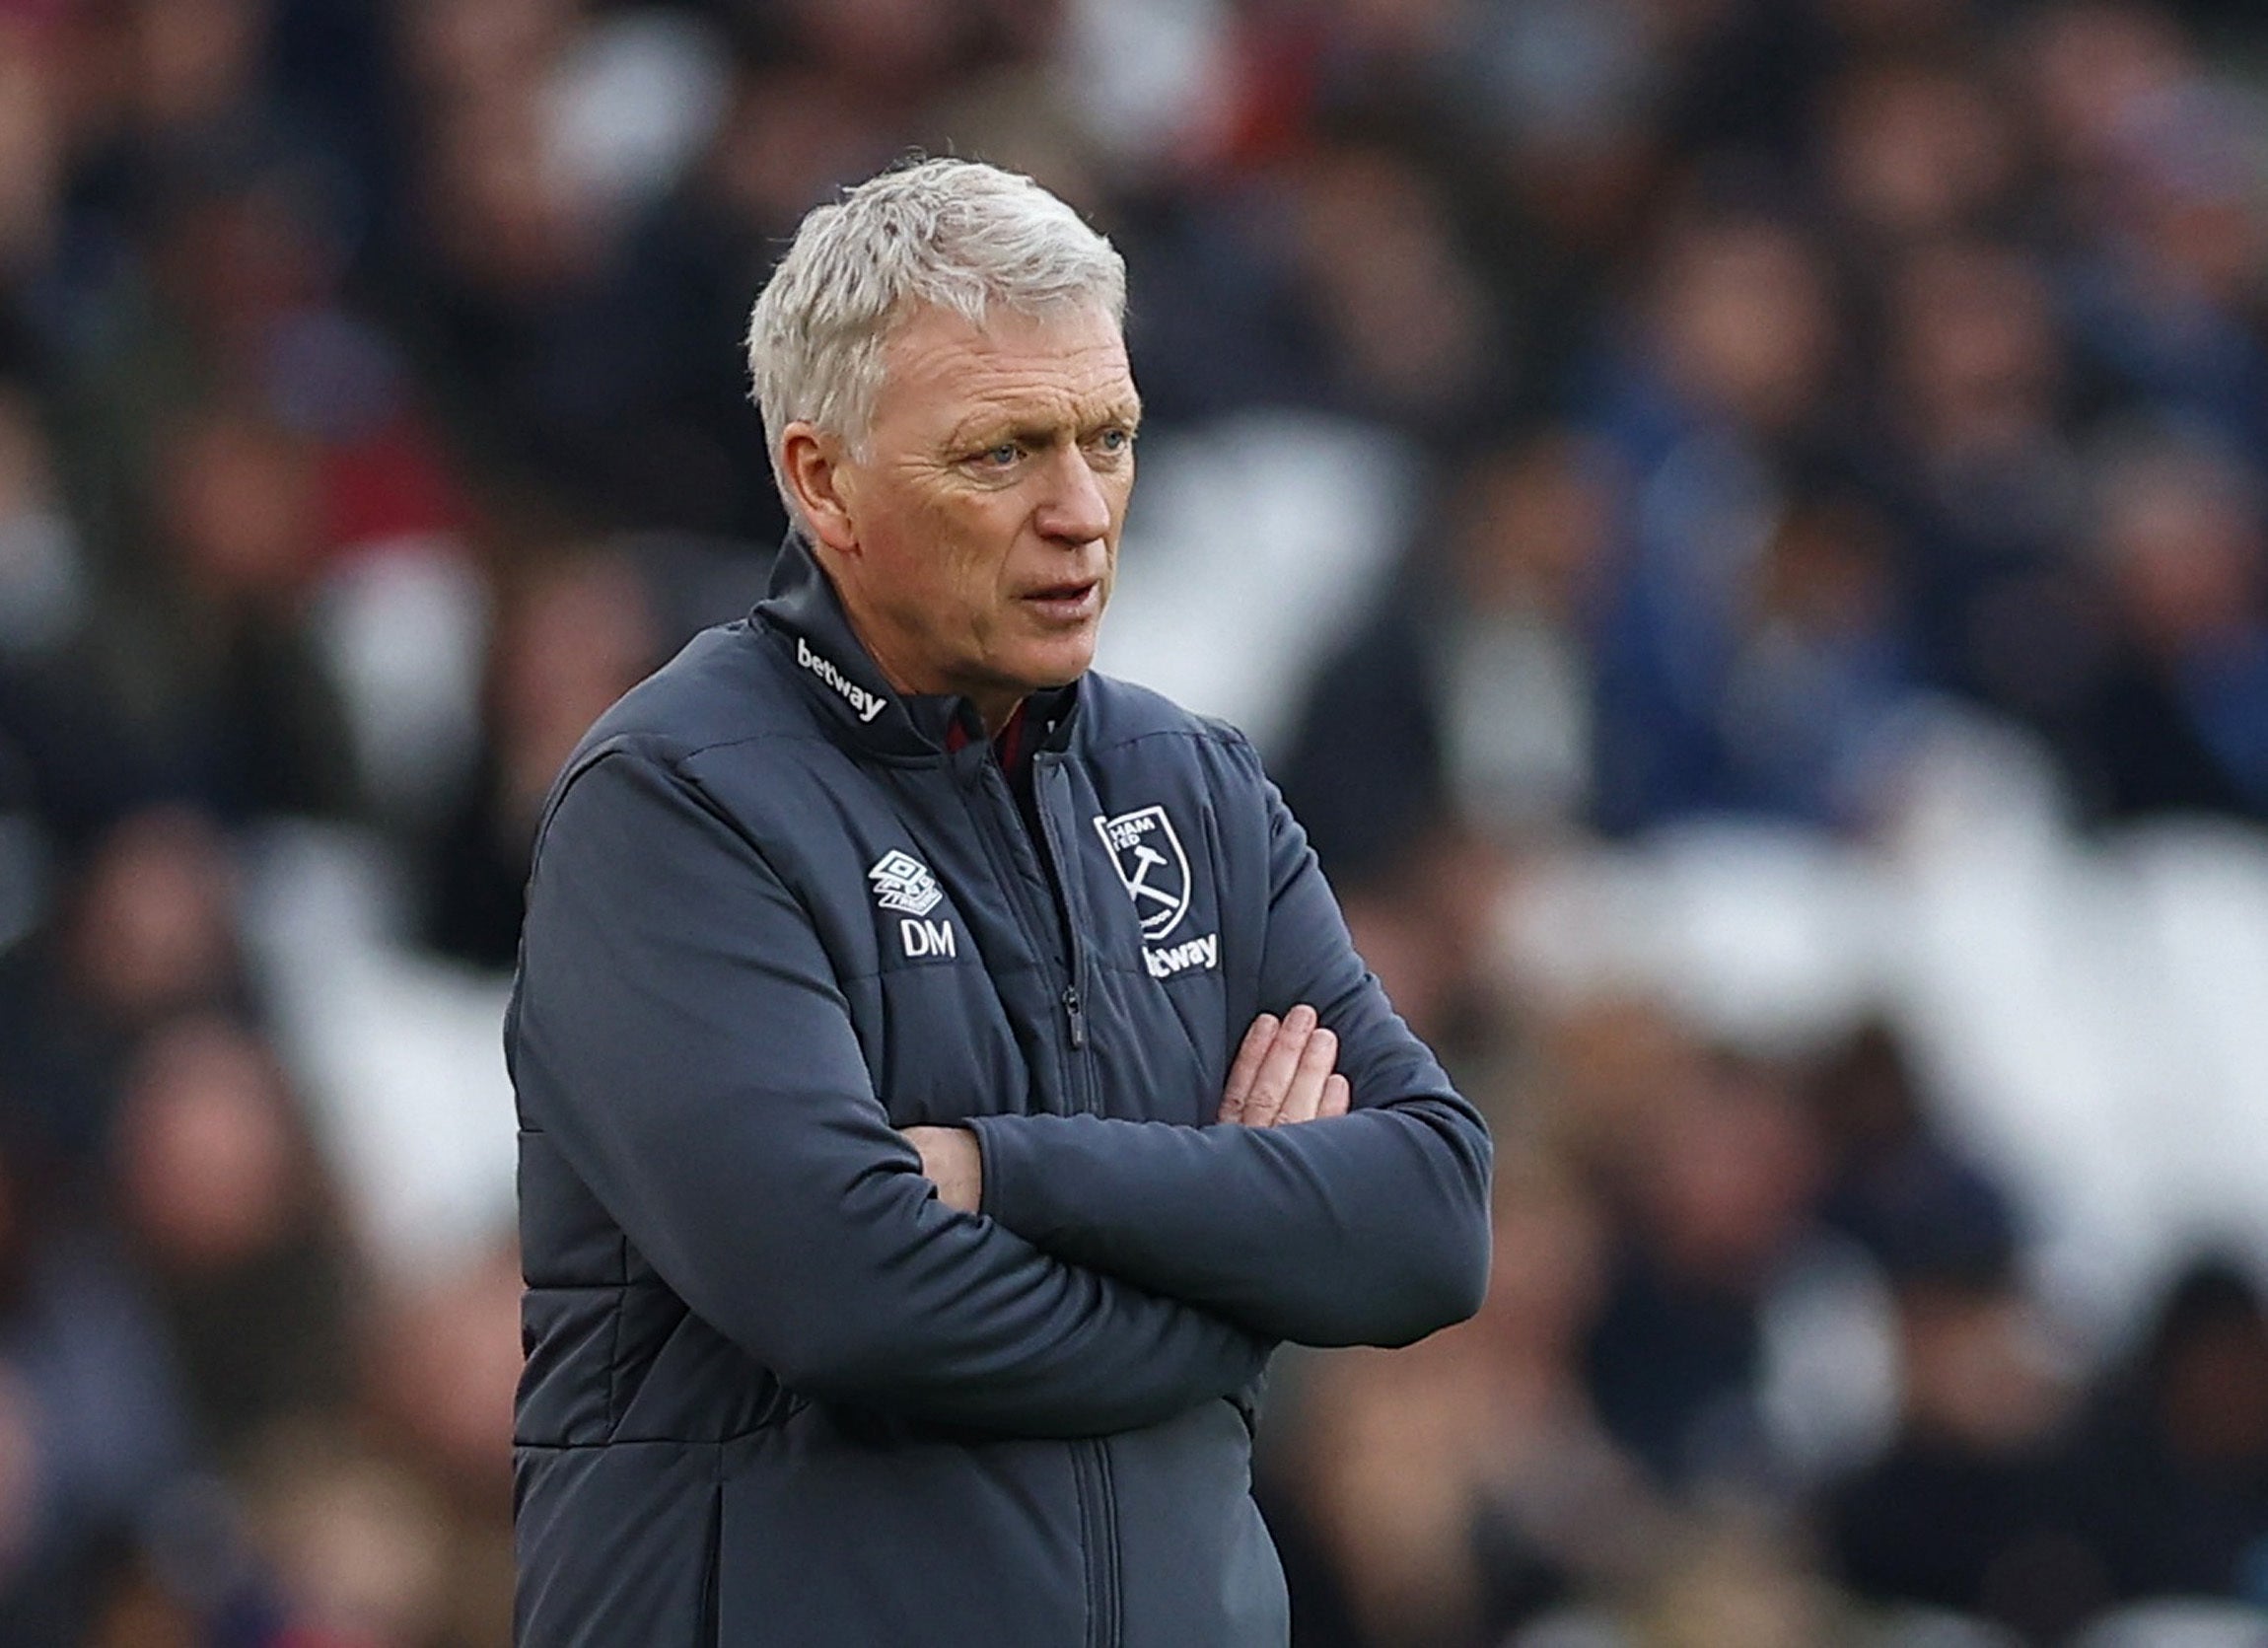 declan rice completes west ham’s humiliation to leave david moyes on the brink